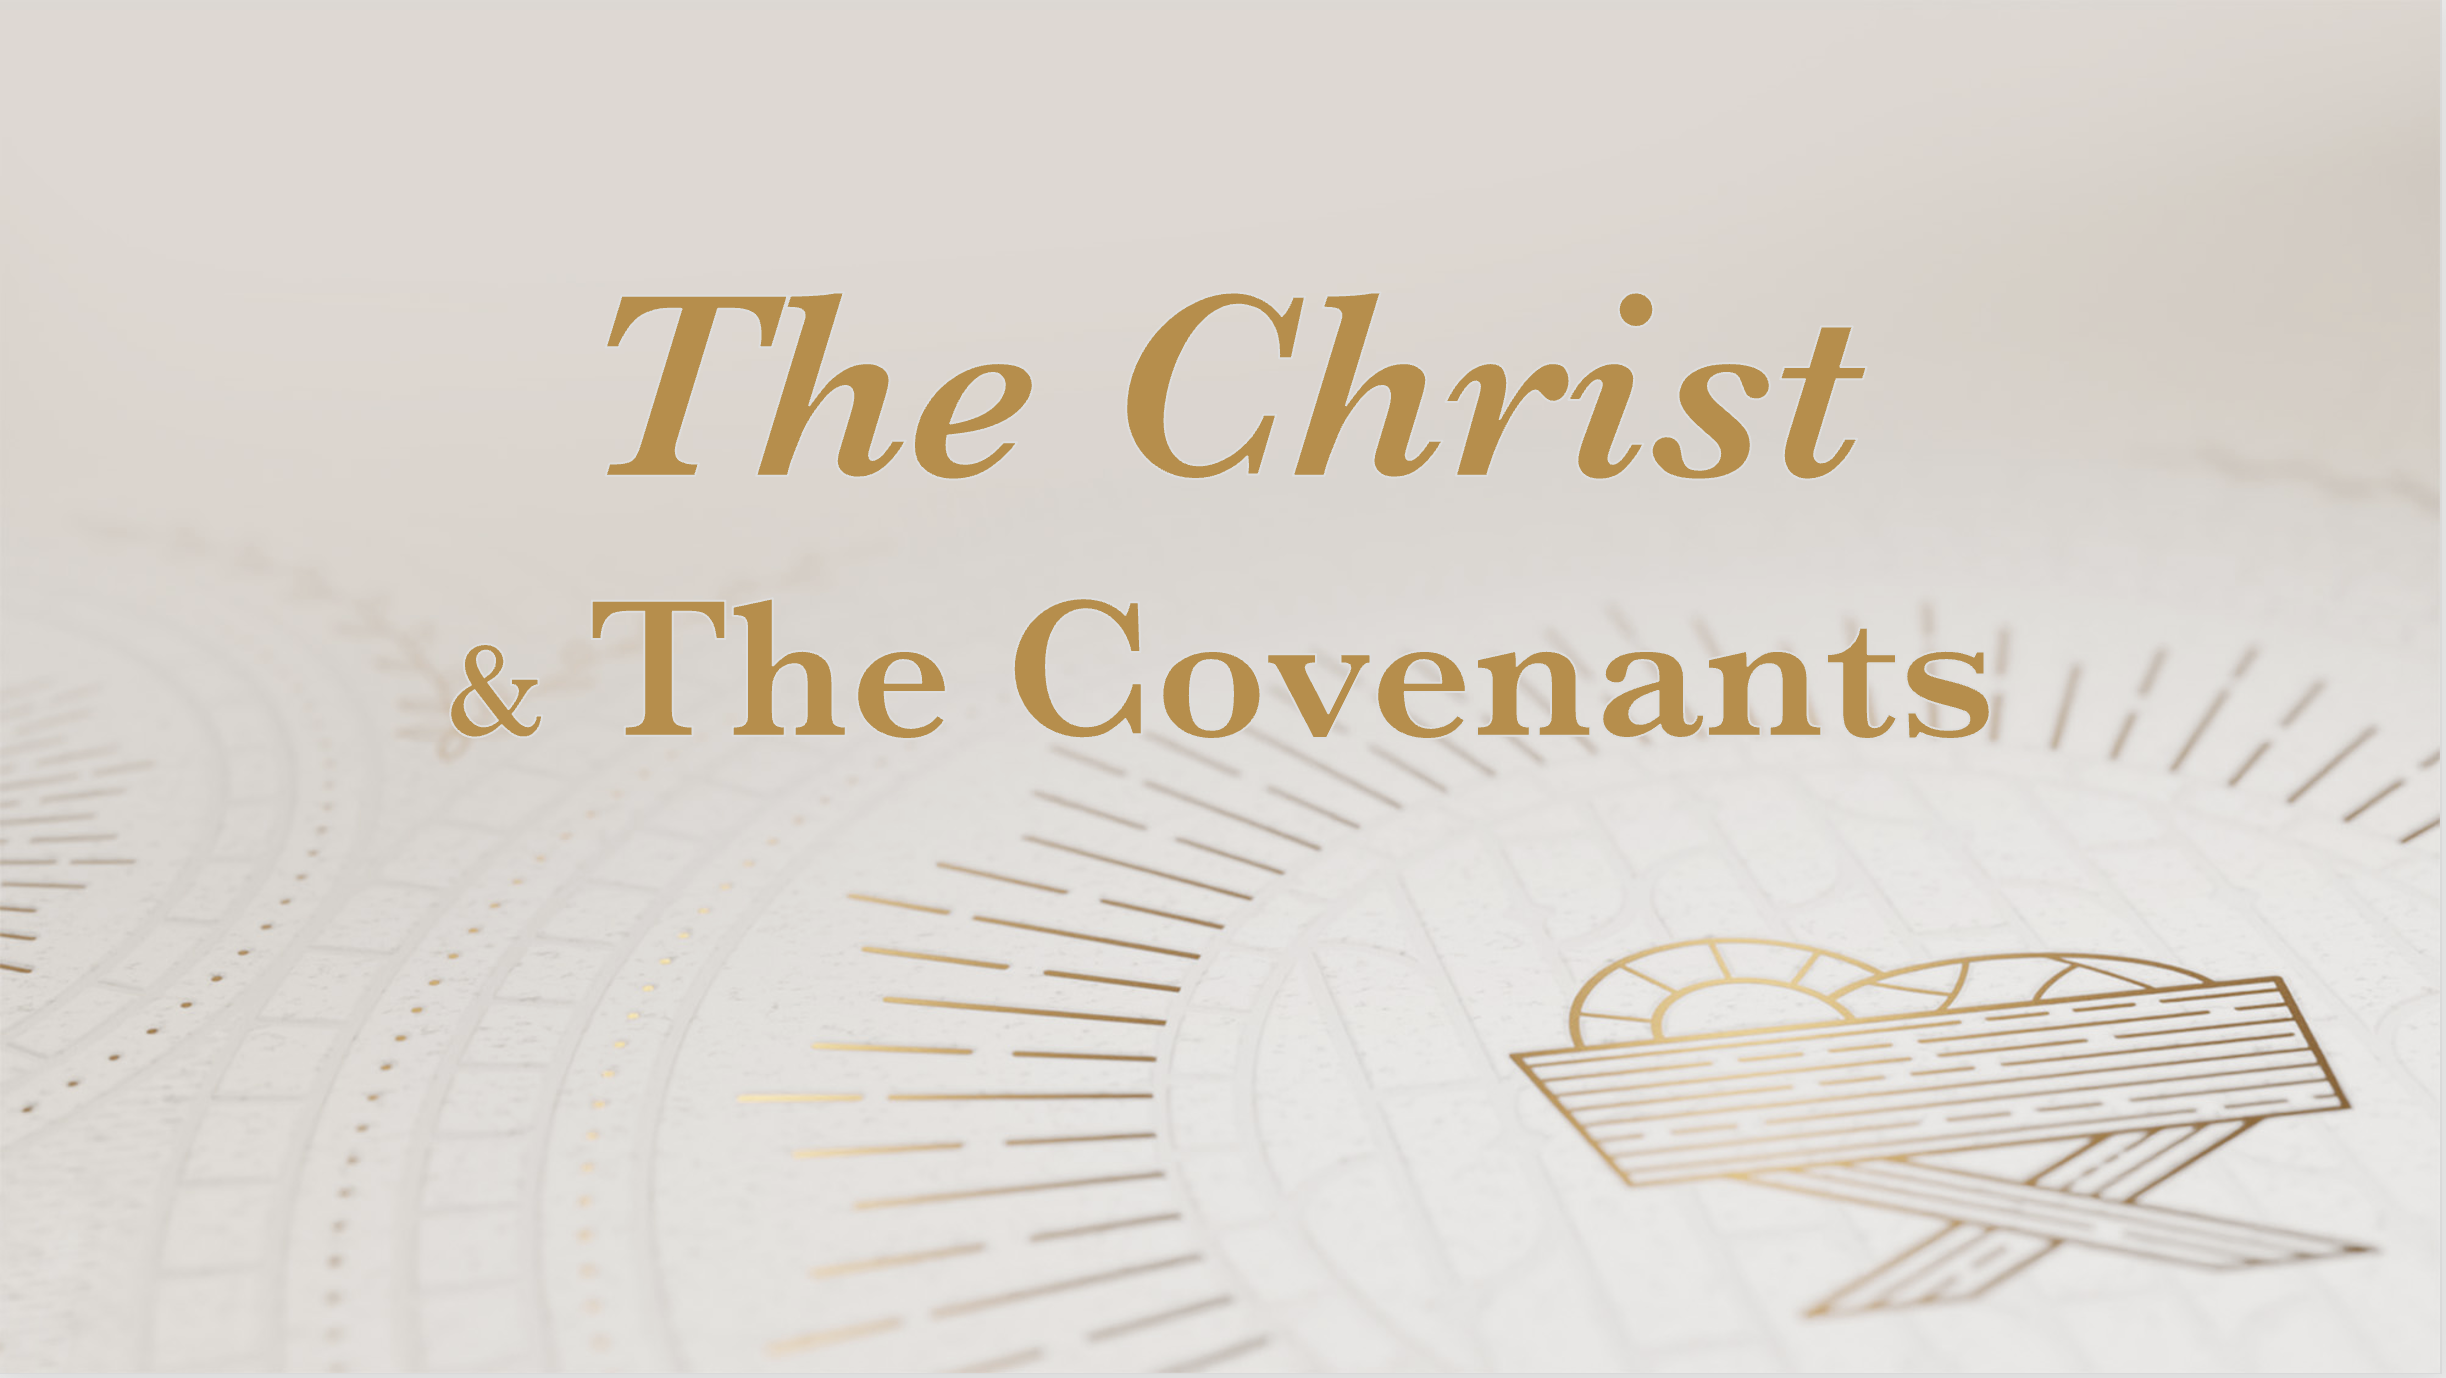 The Christ & The Covenants banner